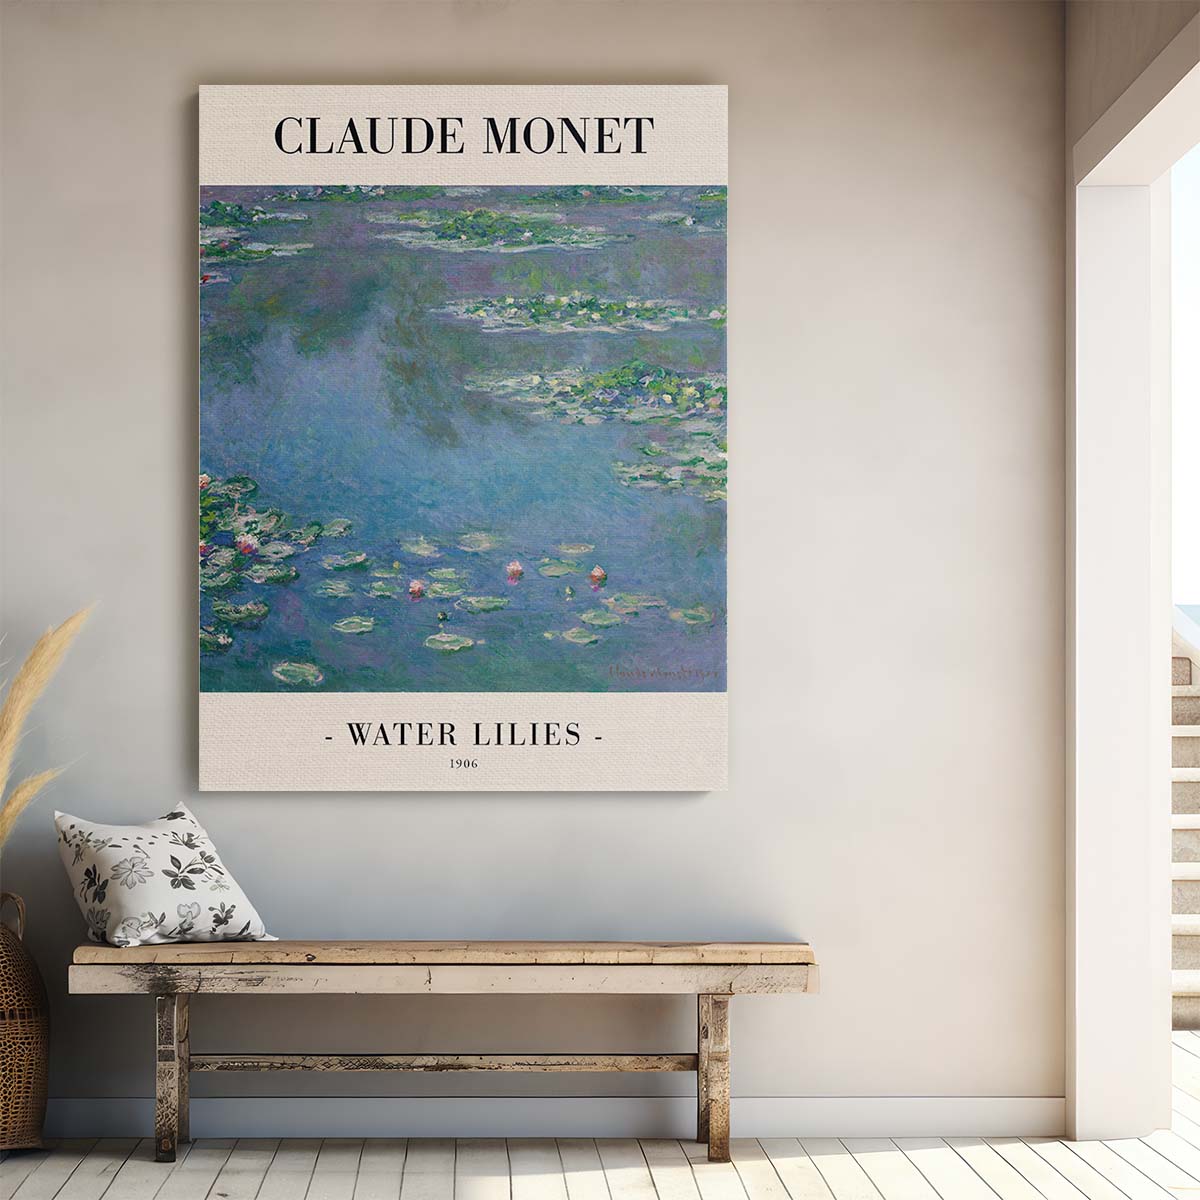 Claude Monet Water Lilies Floral Art Poster, Inspirational Botanical Illustration by Luxuriance Designs, made in USA